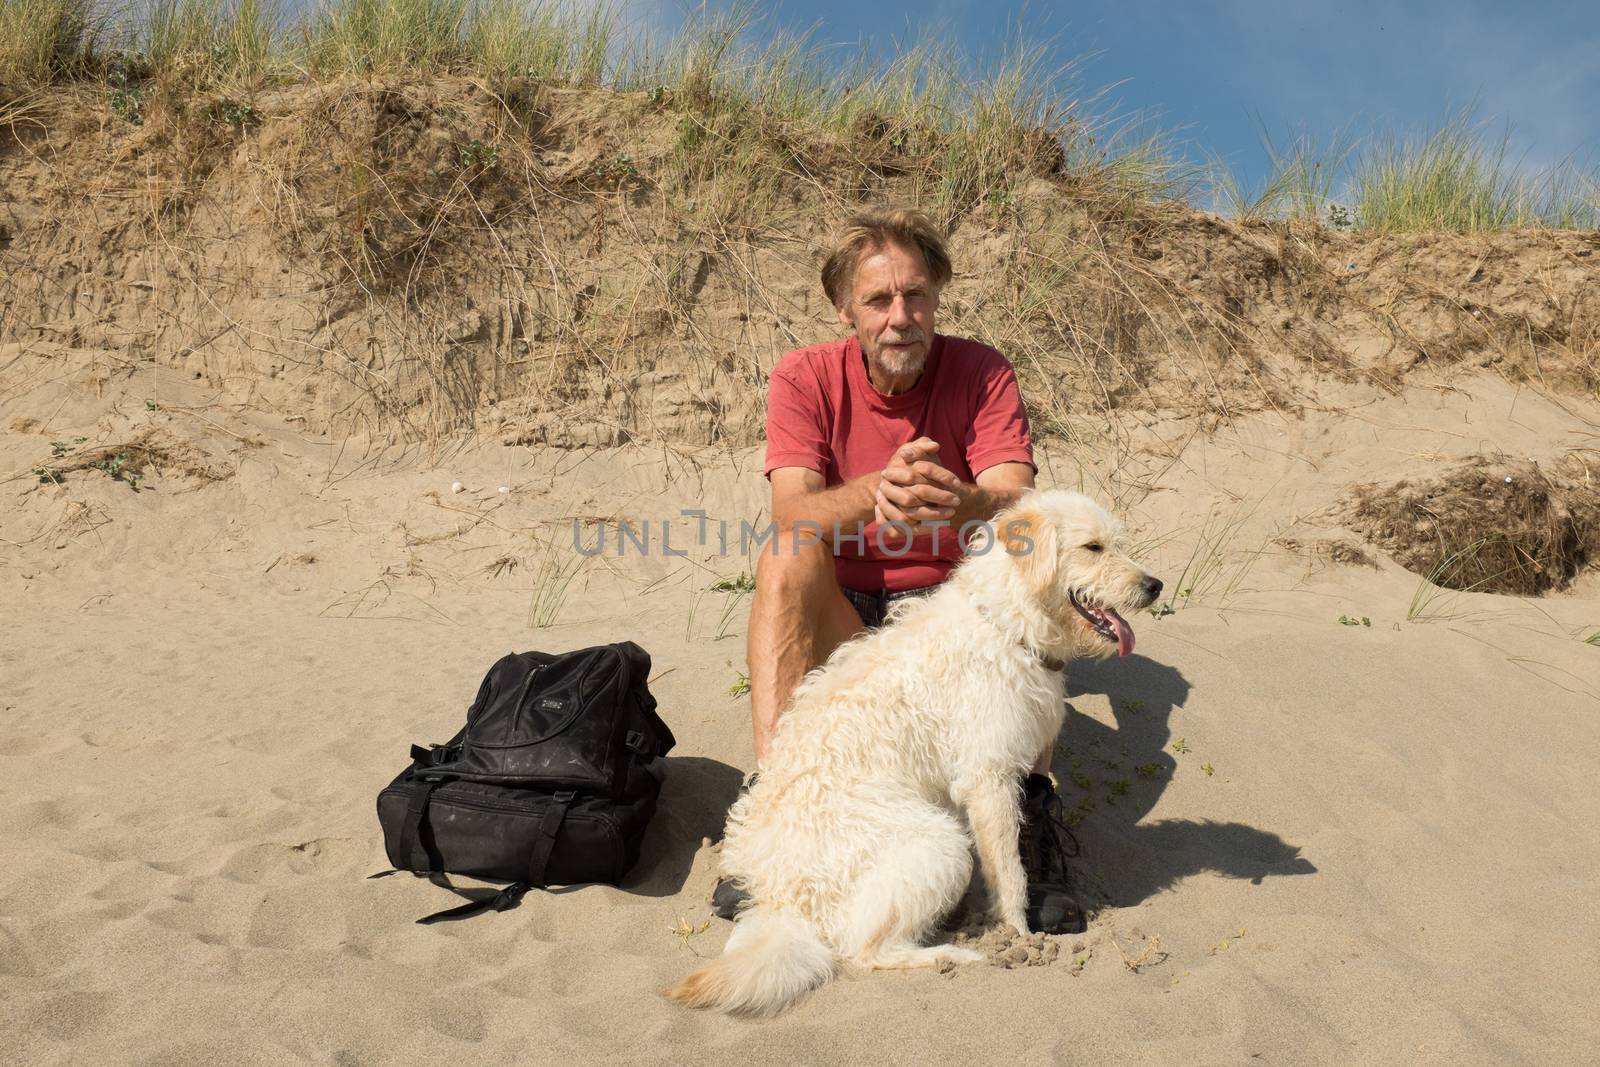 A man and dog, labradoodle, sitting on a beach under a sand dune staring ahead.